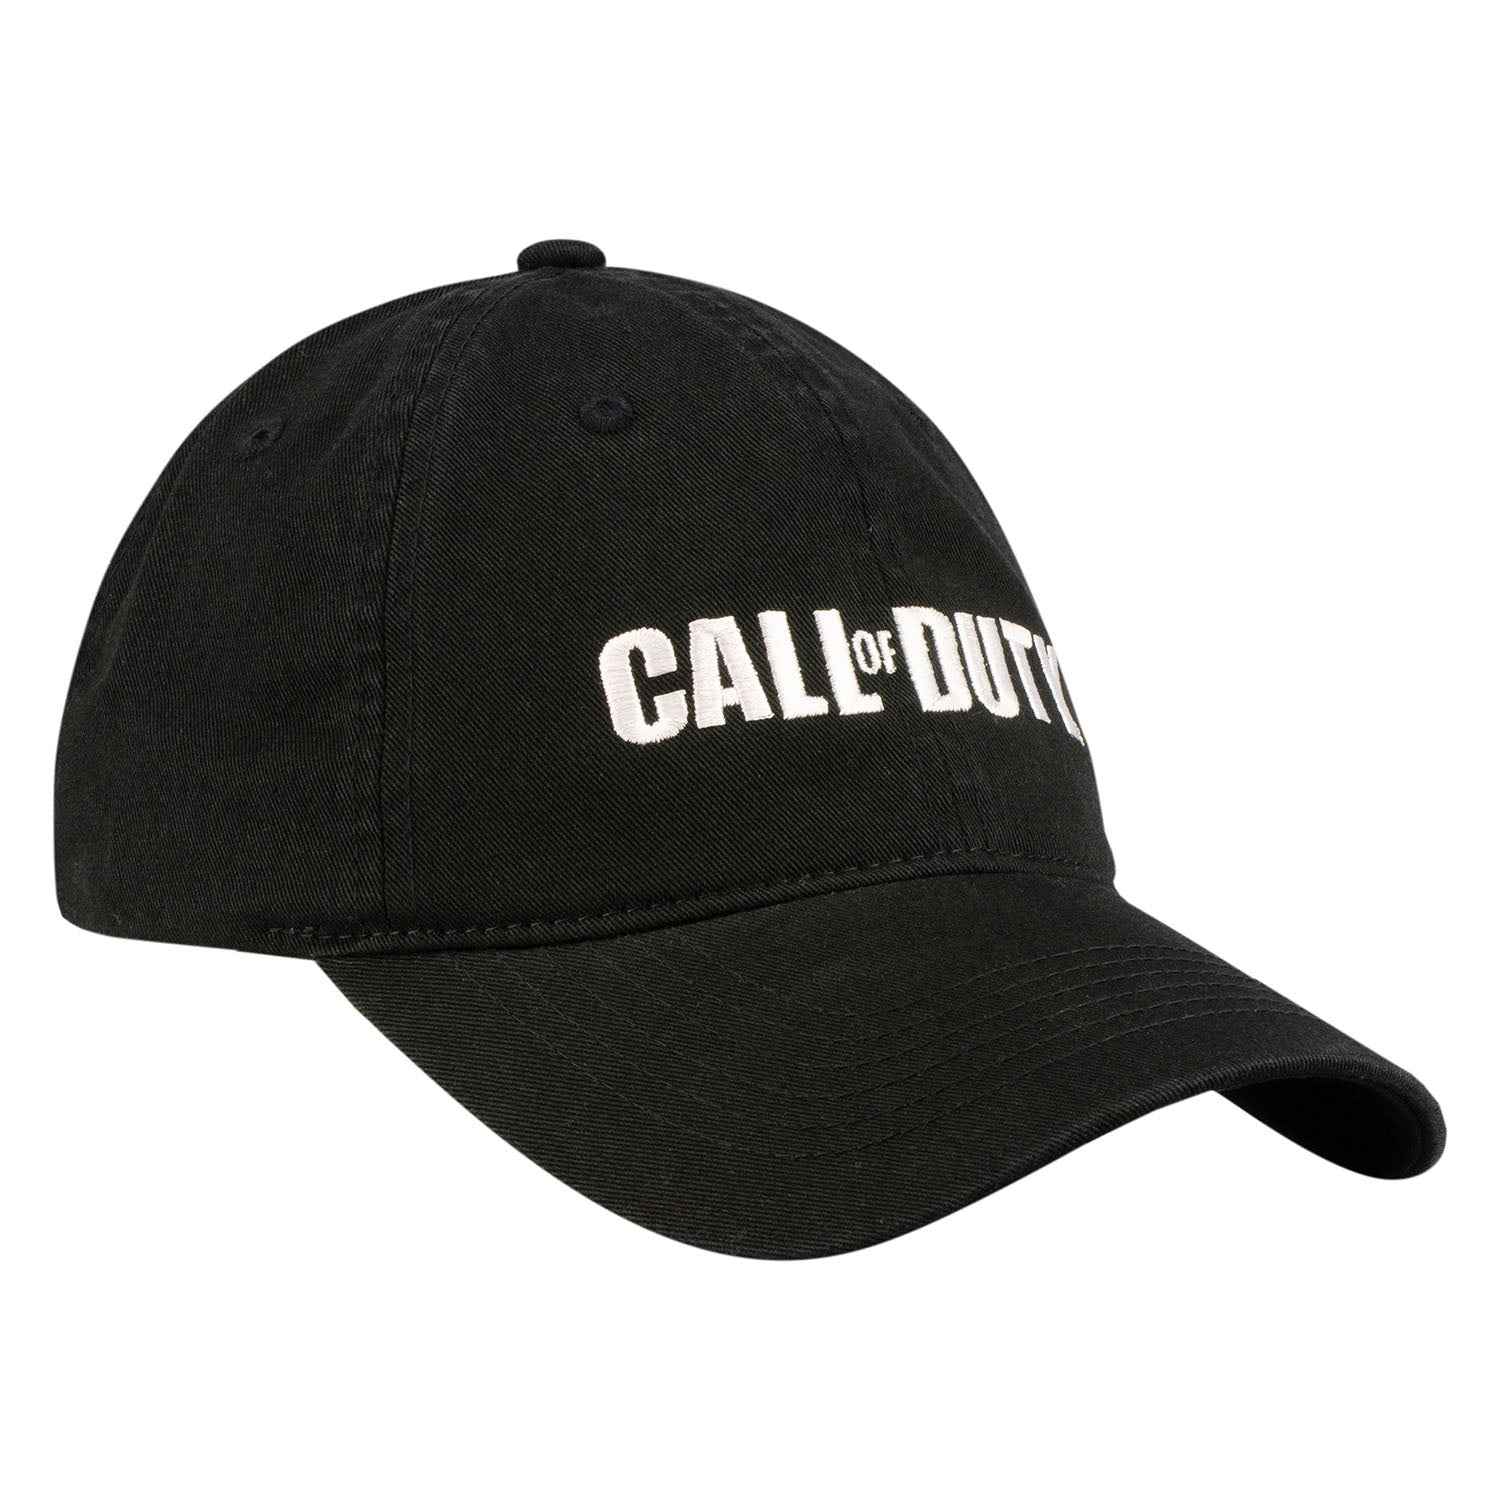 Call of Duty Black Logo Hat - Right View